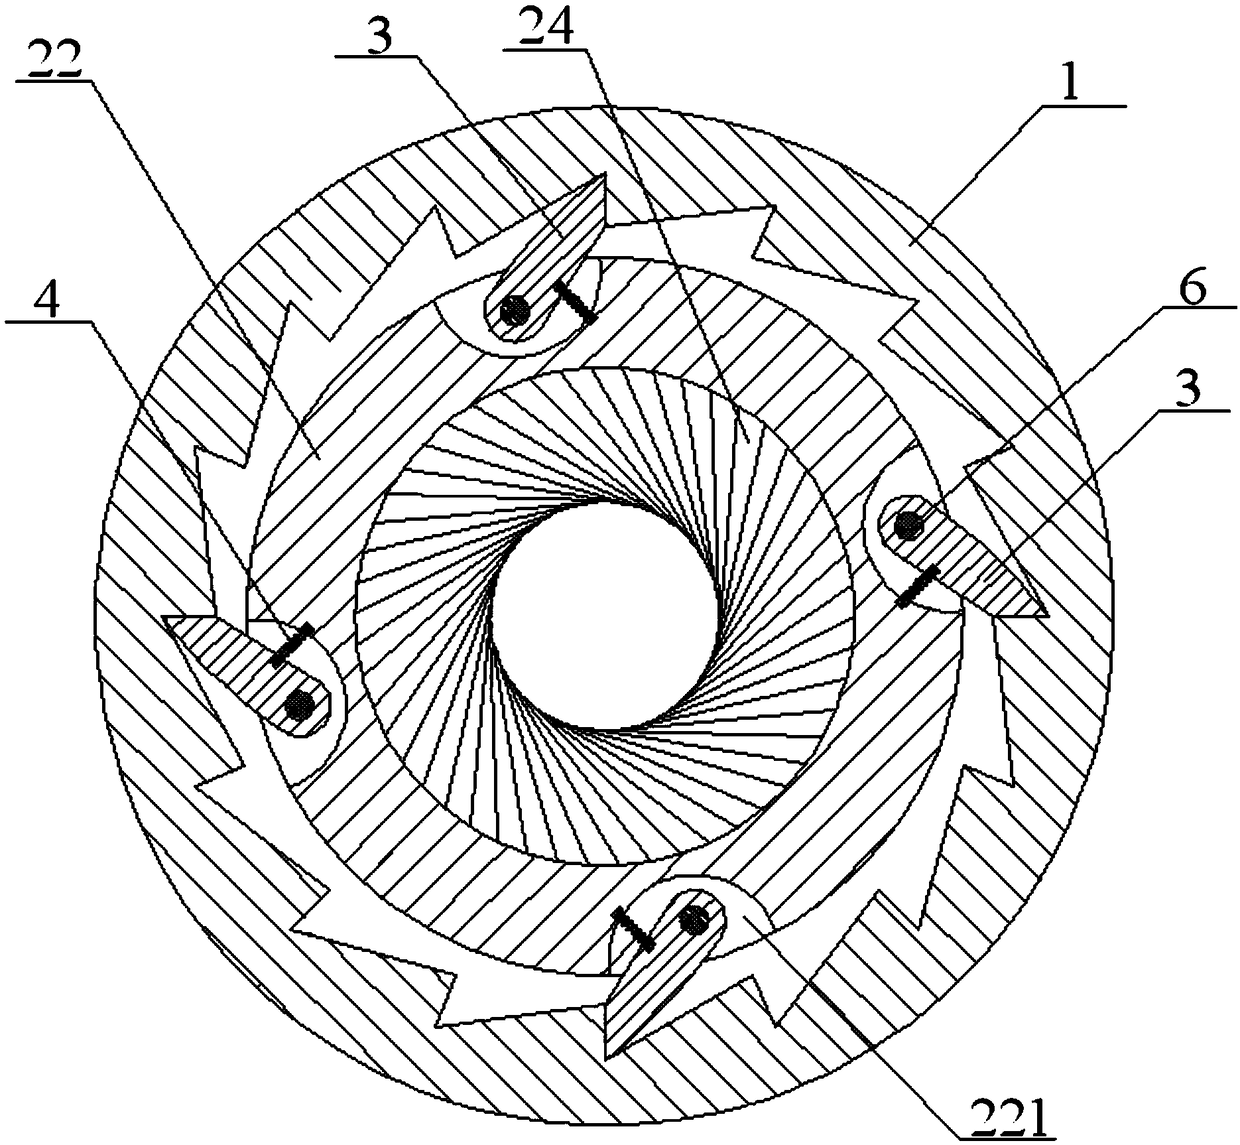 Brush type sealing structure allowing rotor to reverse